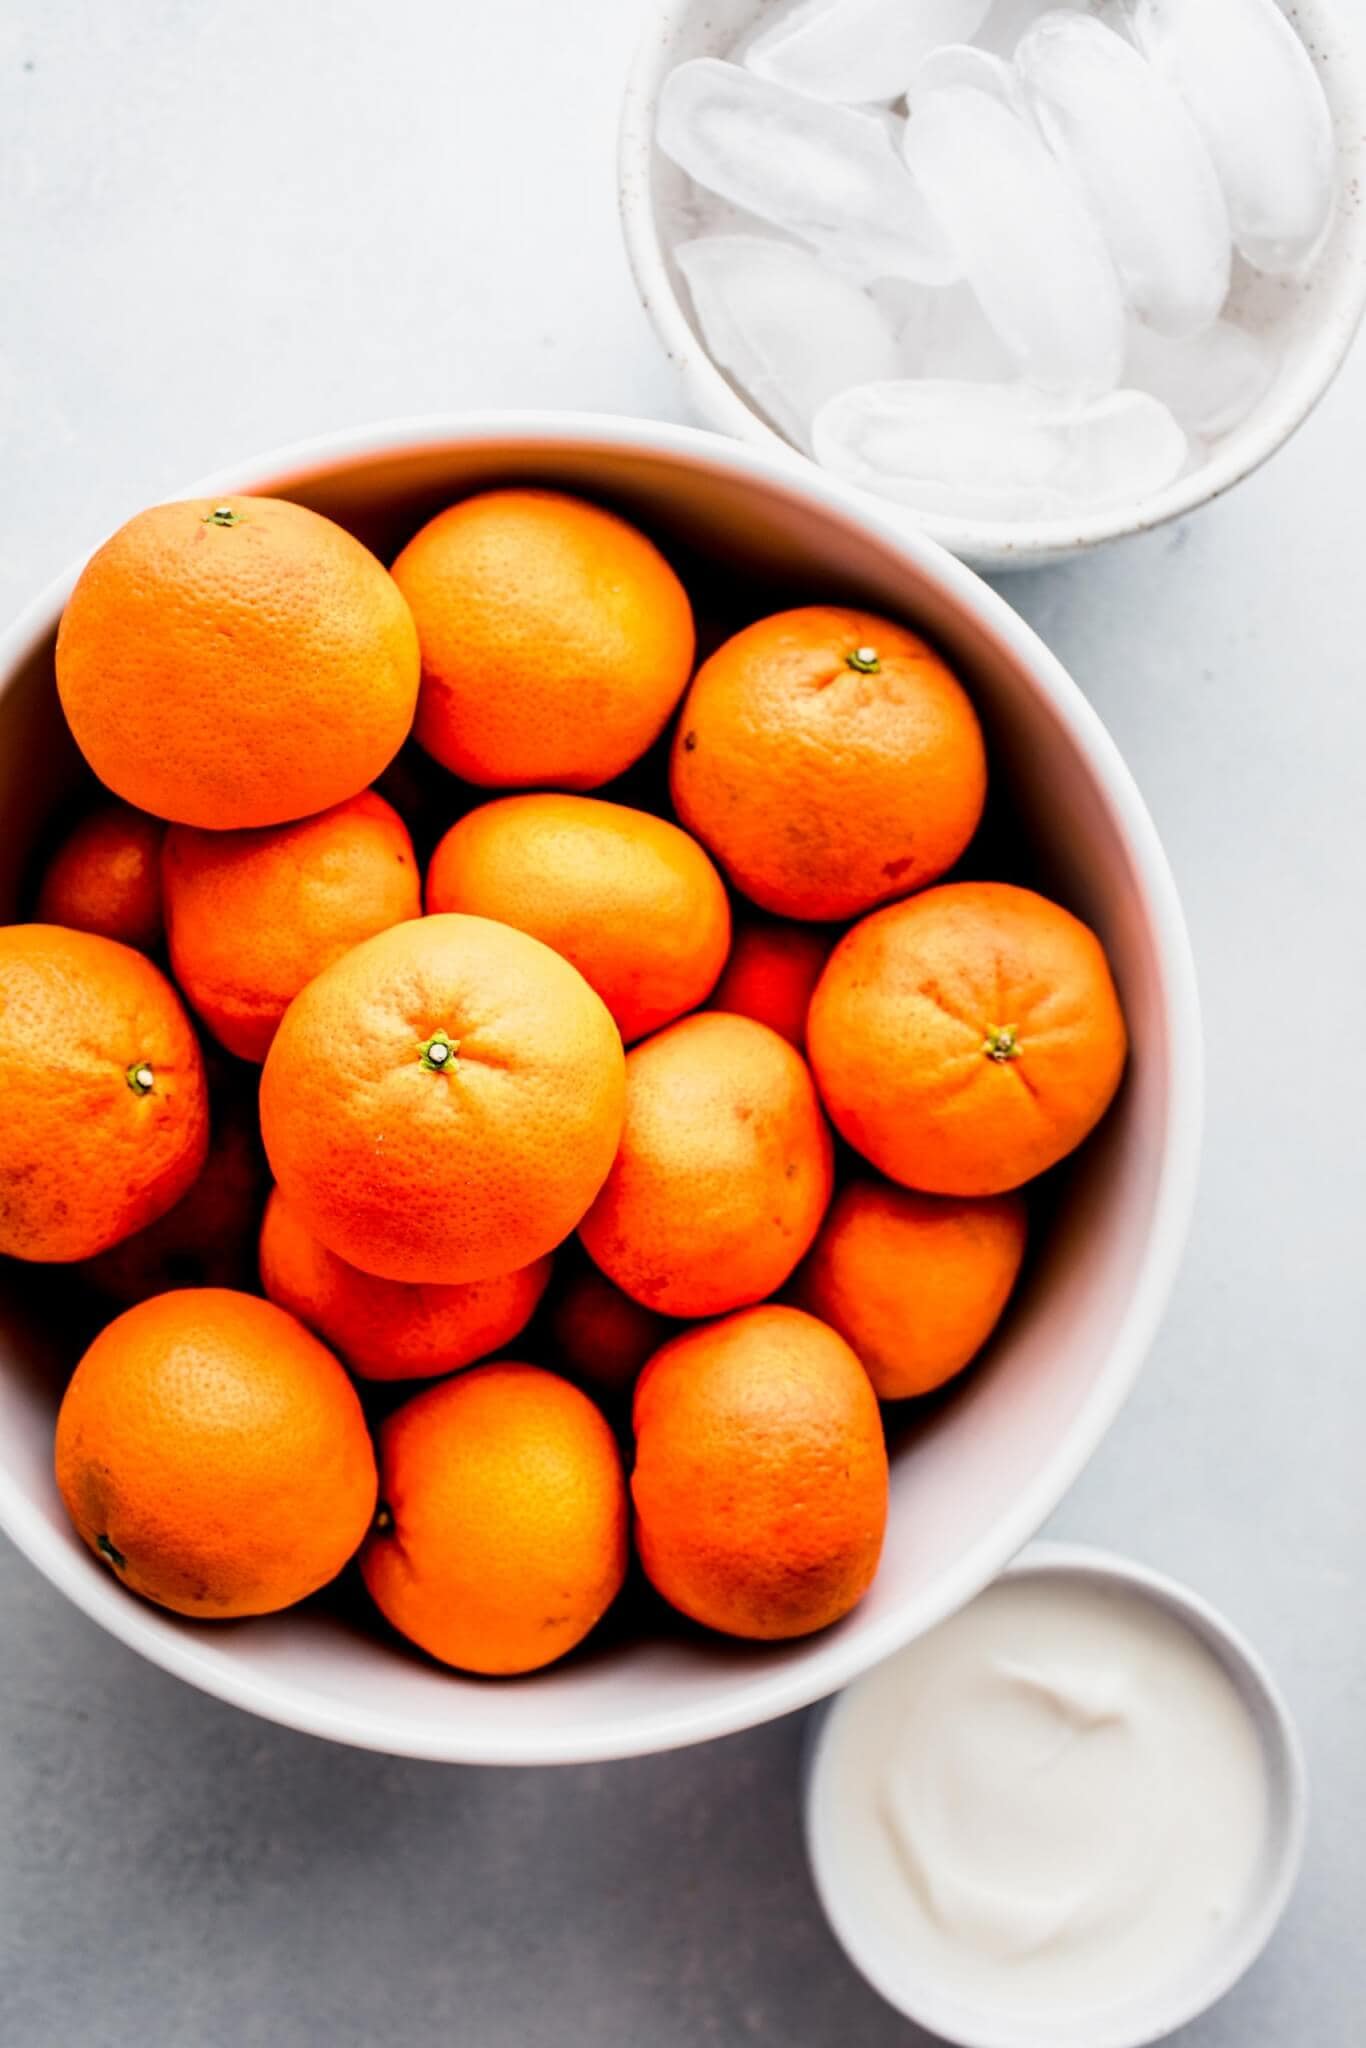 Bowl of clementines next to small bowl of yogurt.